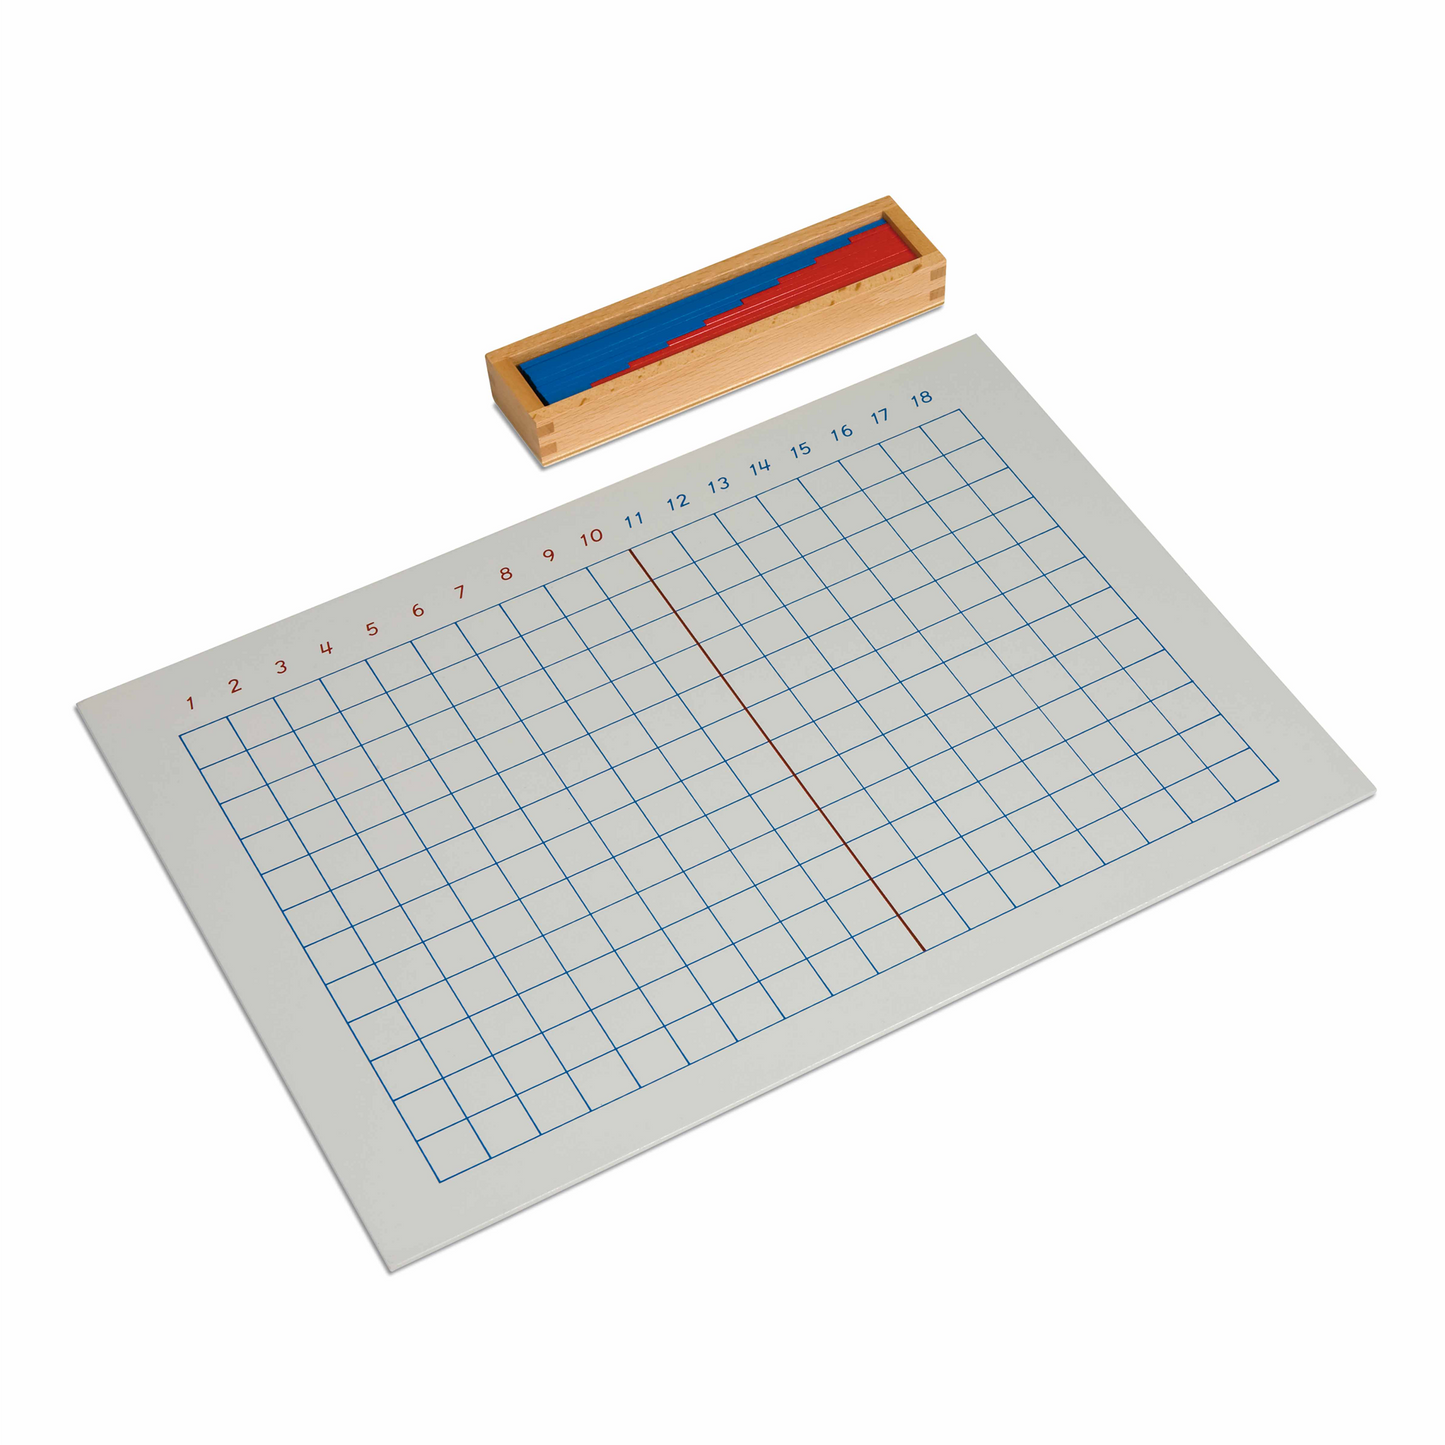 Addition board and rulers - Nienhuis AMI